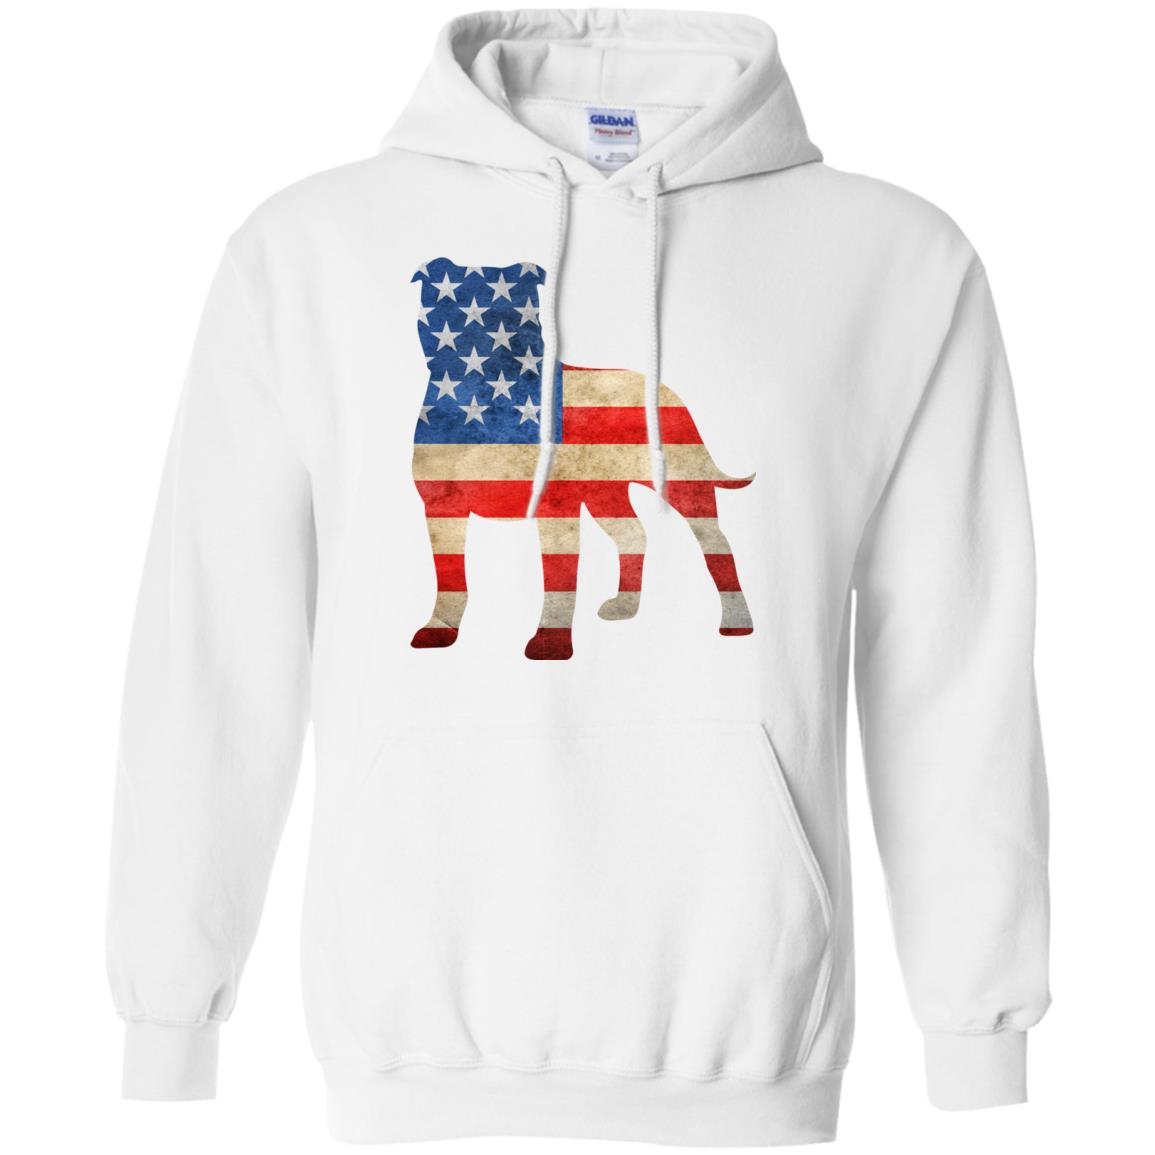 Vintage Staffordshire Bull Terrier USA Pullover Hoodie White